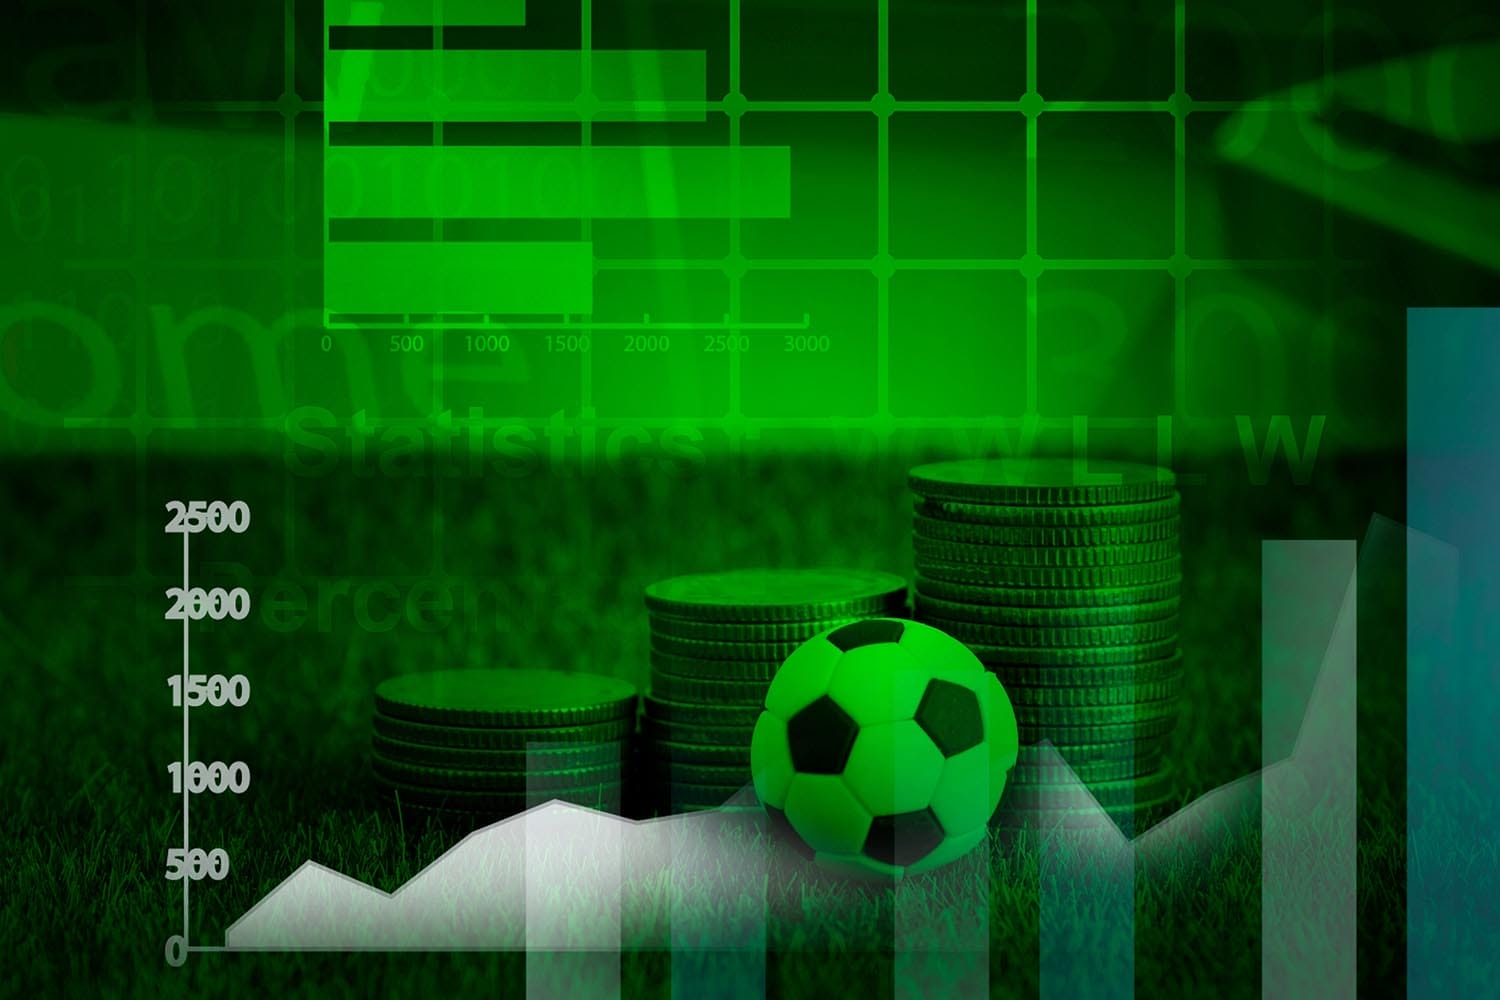 Business in football , soccer team management , online betting